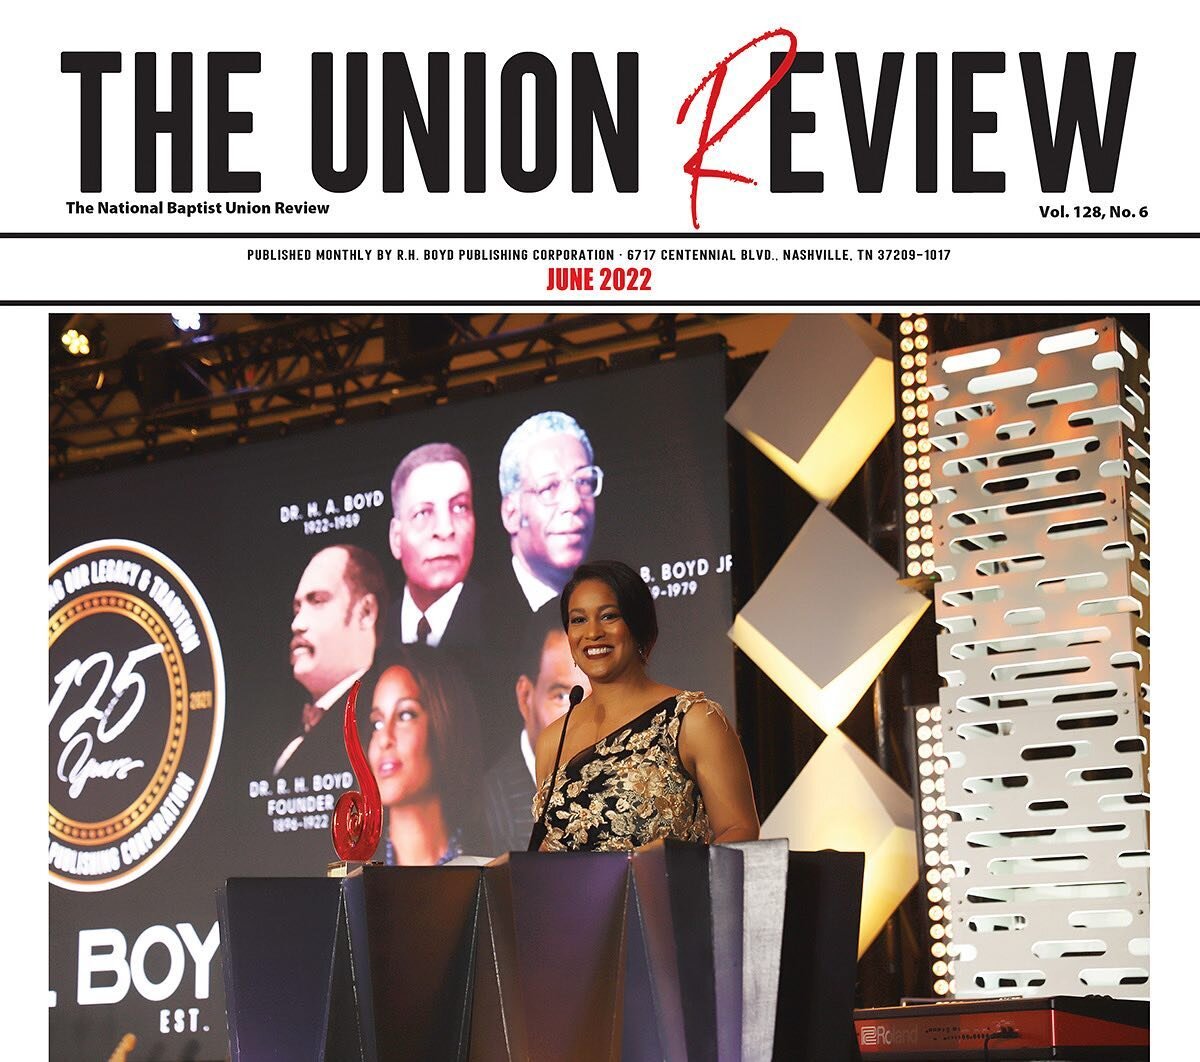 Check out the newest edition of the Union Review and relive the  2022 Vision Conference&trade; highlights!

After two years of virtual programming, we were proud to welcome attendees from across the country to share learning and fellowship opportunit